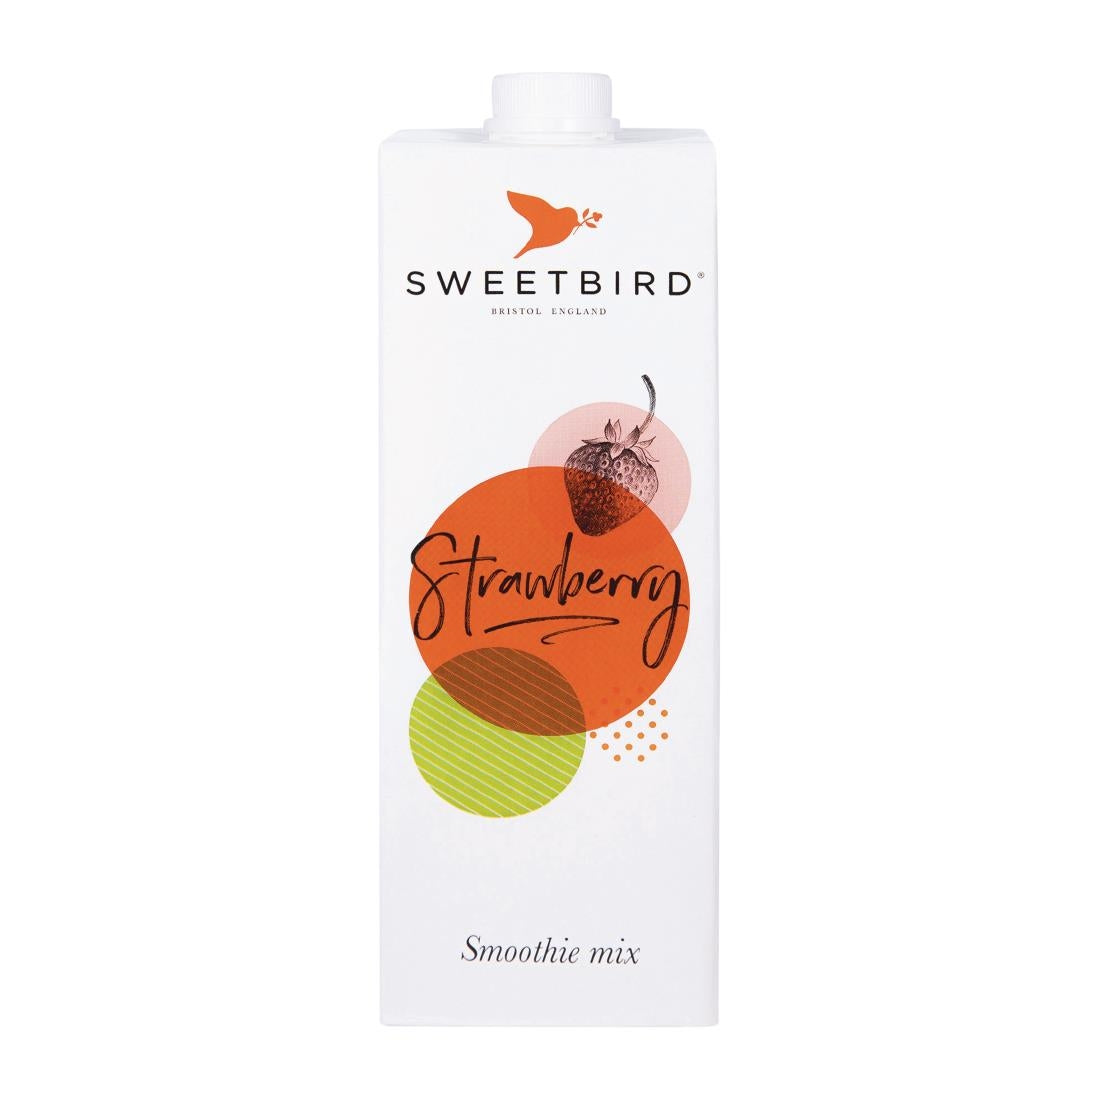 DX594 Sweetbird Strawberry Smoothie 1Ltr